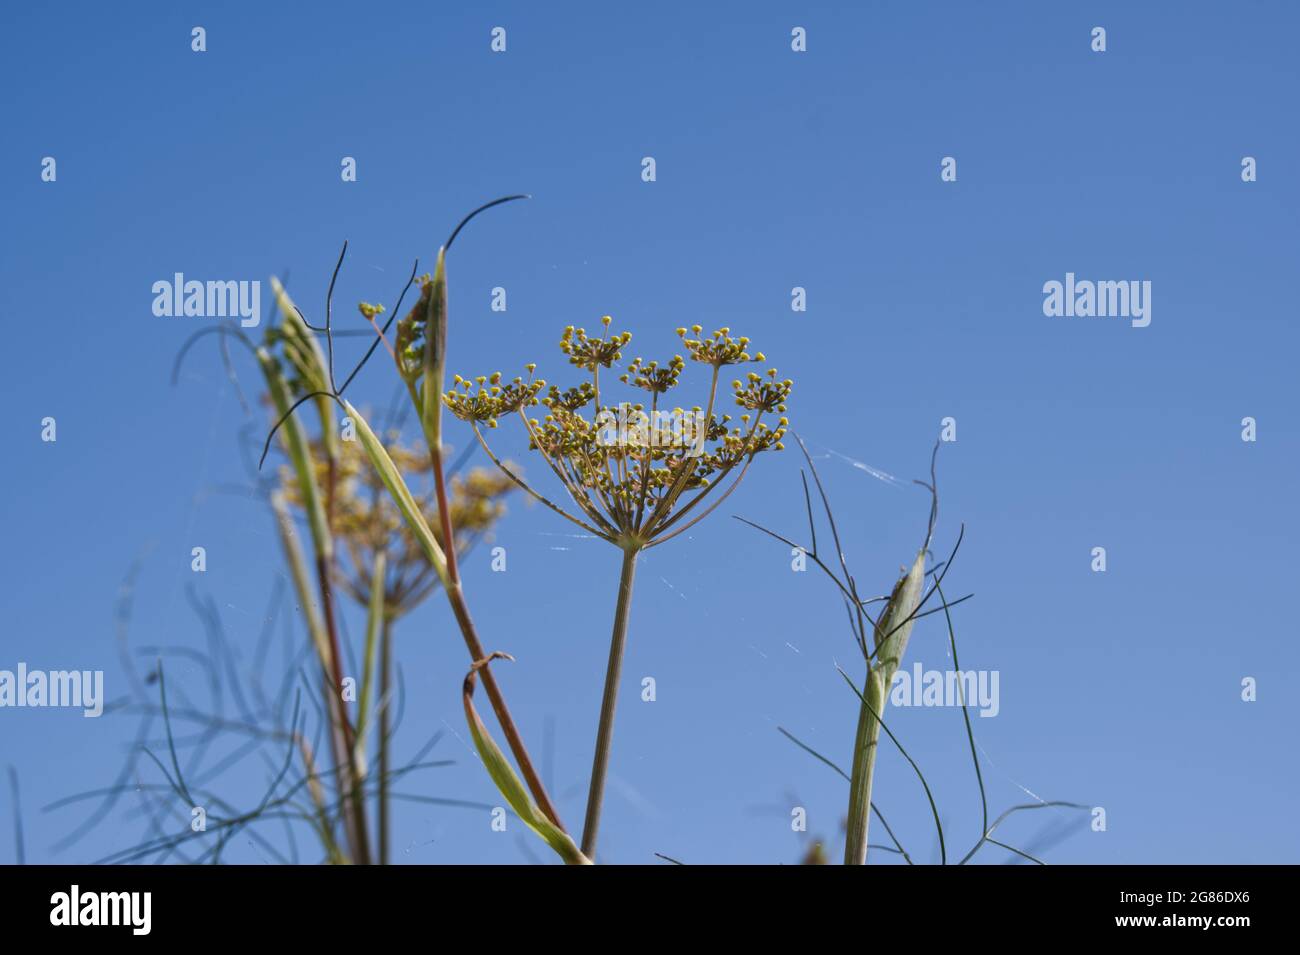 Summer flowers of bronze fennel (Foeniculum vulgare) against a blue sky in July UK Stock Photo